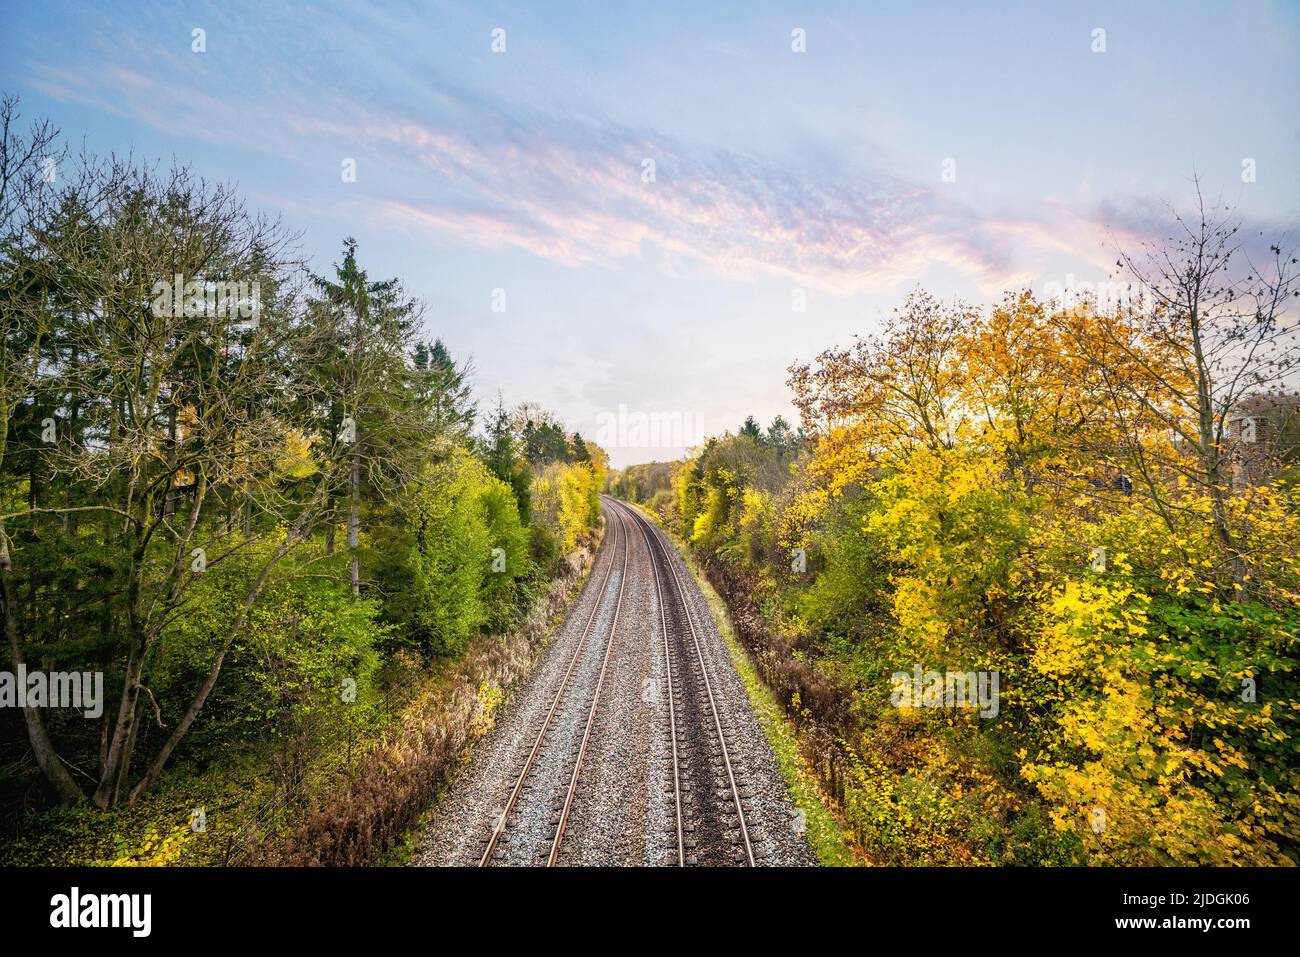 Colorful autumn scenery with a railroad track going through the landscape Stock Photo